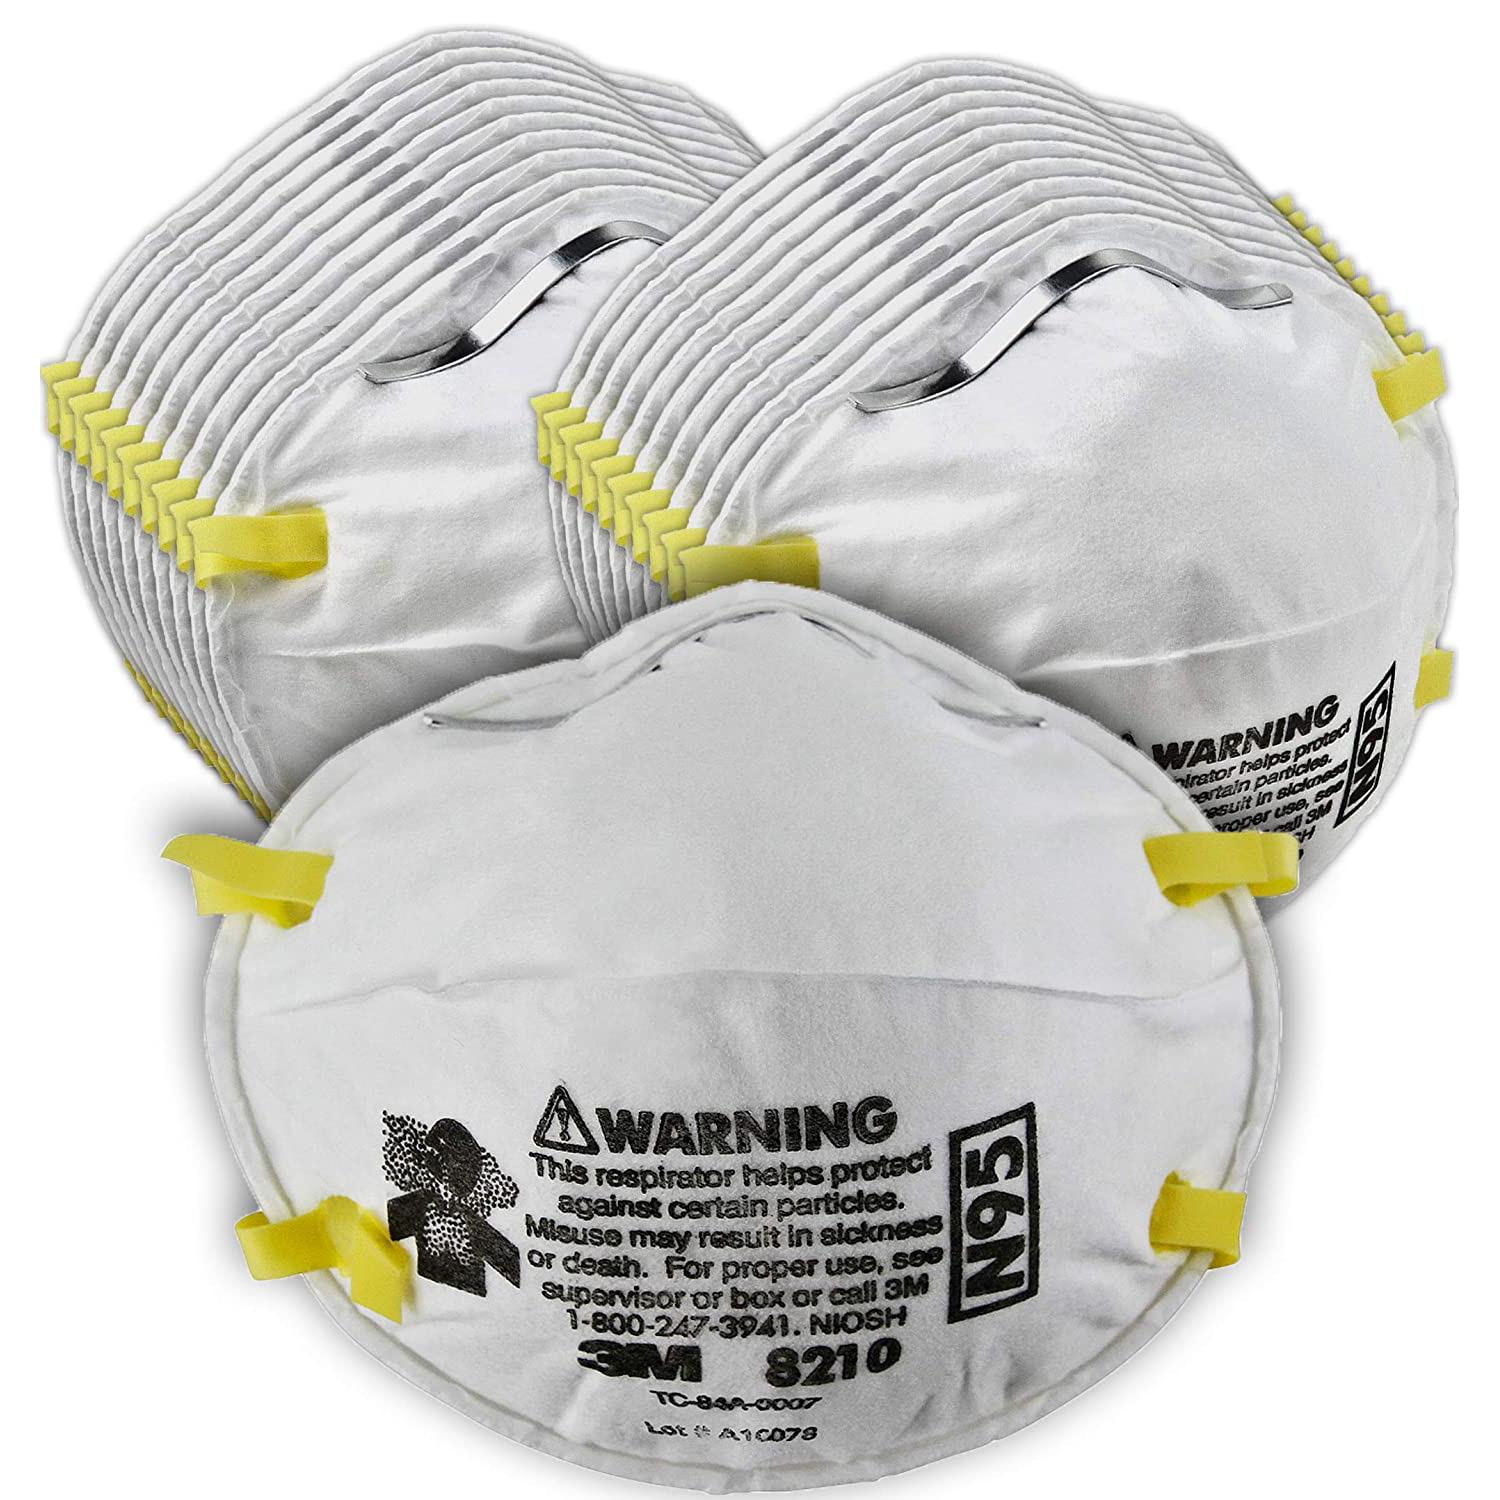 20 3M N95 Personal Protective Equipment Particulate Respirator for $11.55